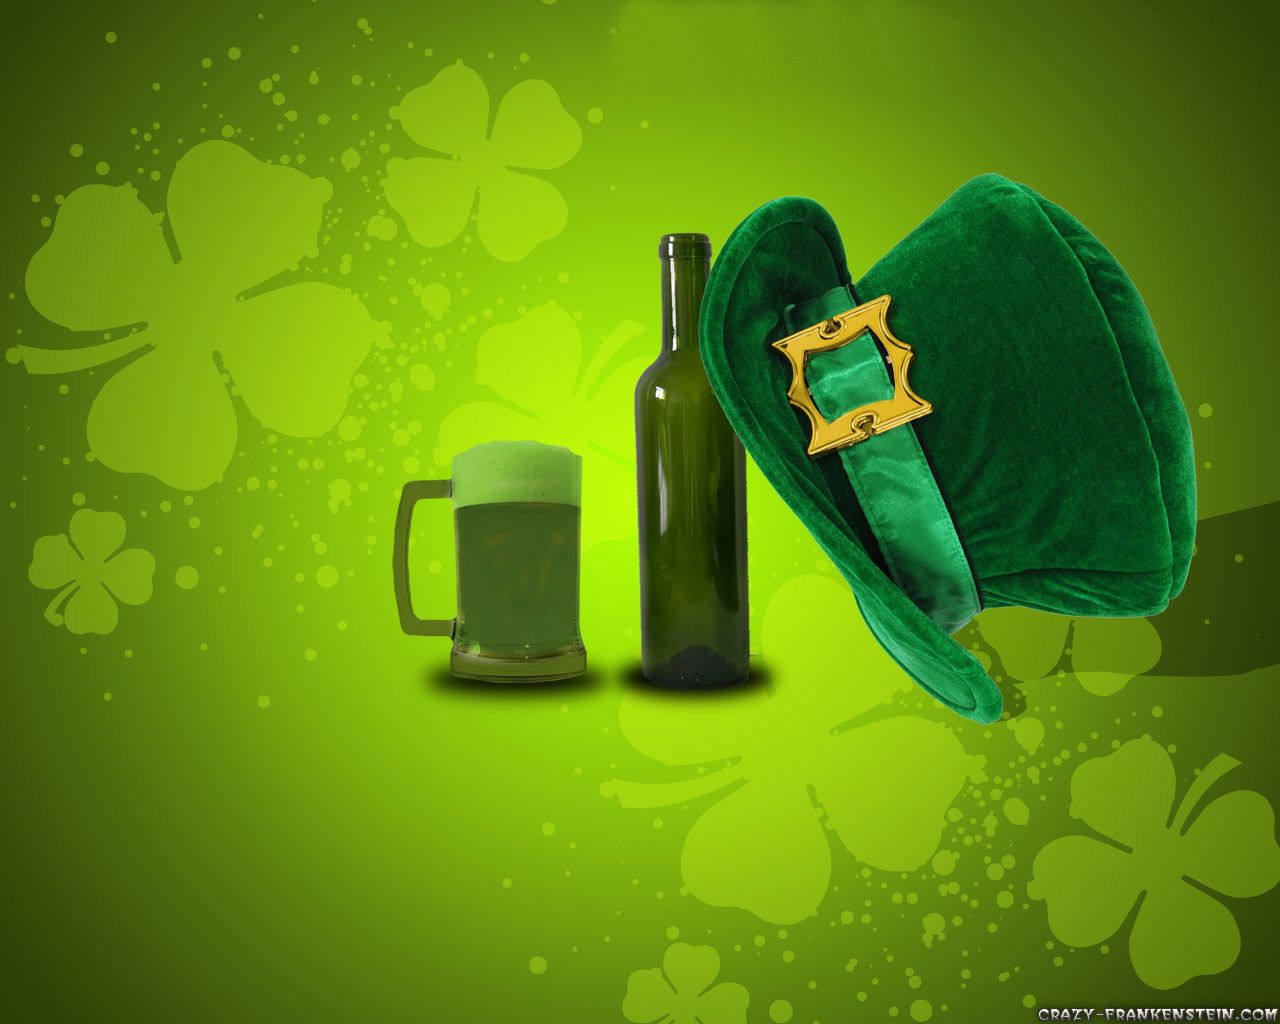 St. Patrick's Day - Holiday wallpapers - Crazy Frankenstein